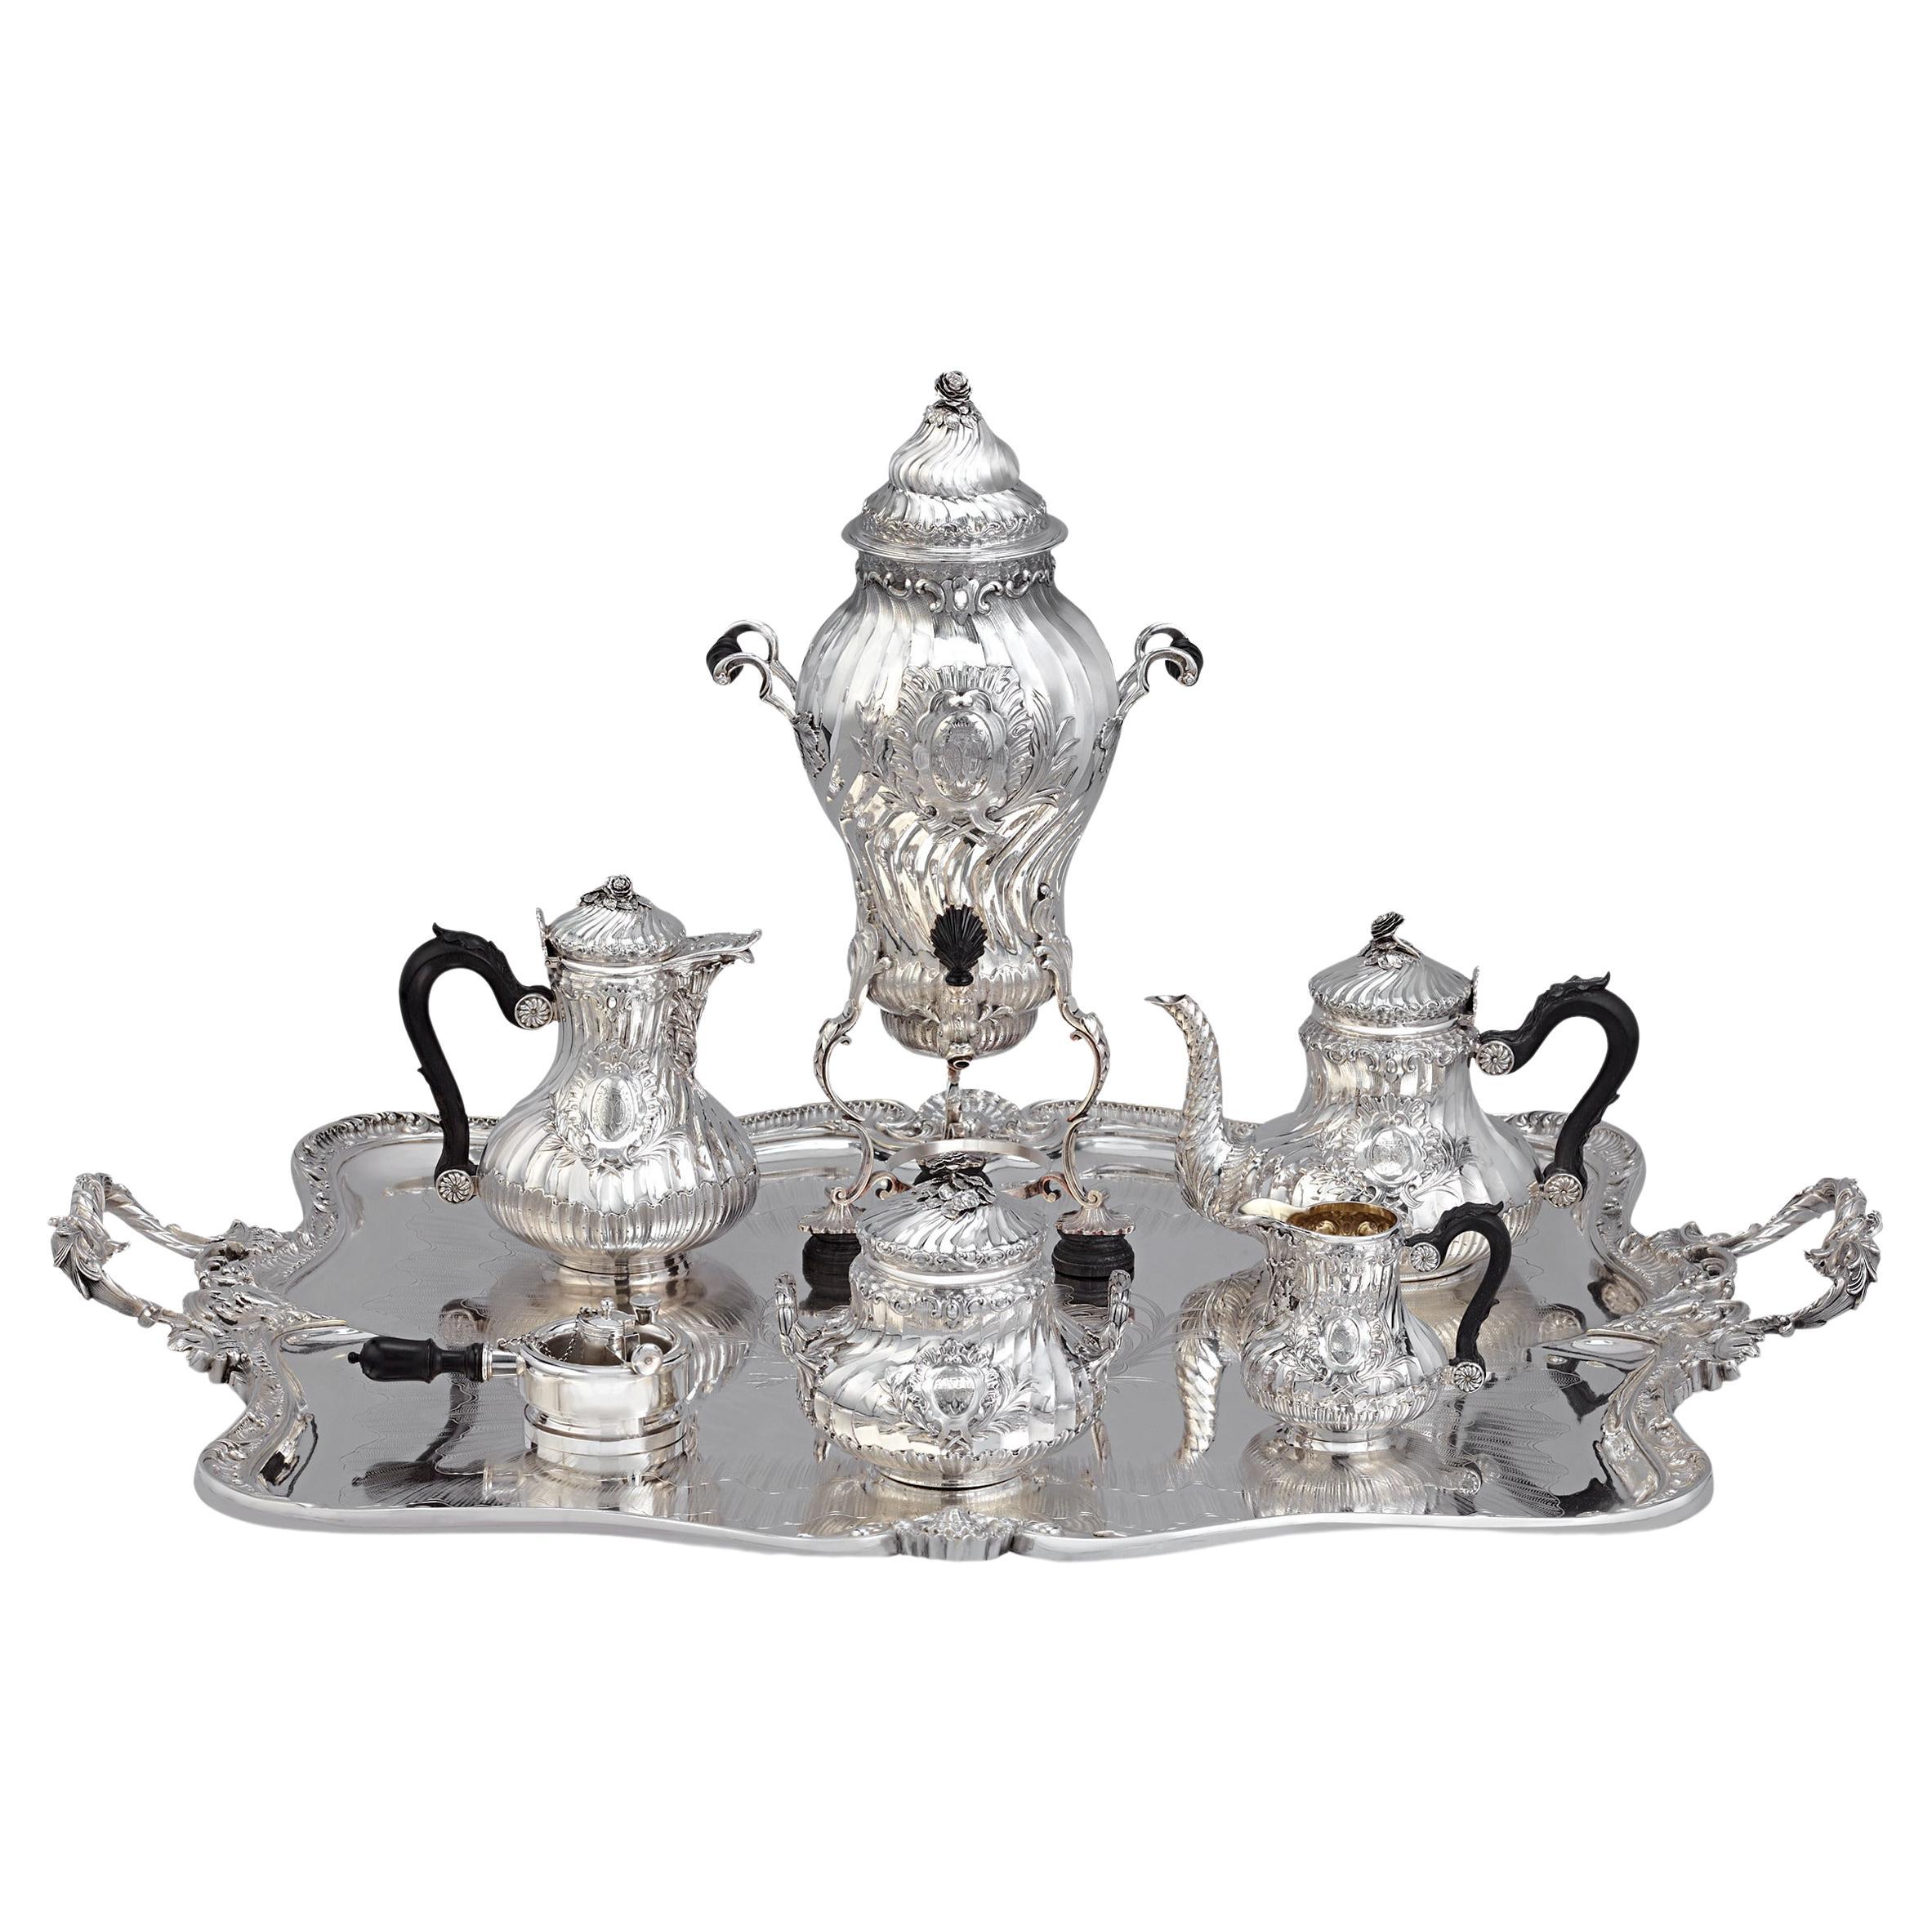 Silver Coffee and Tea Service by Boin-Taburet Paris